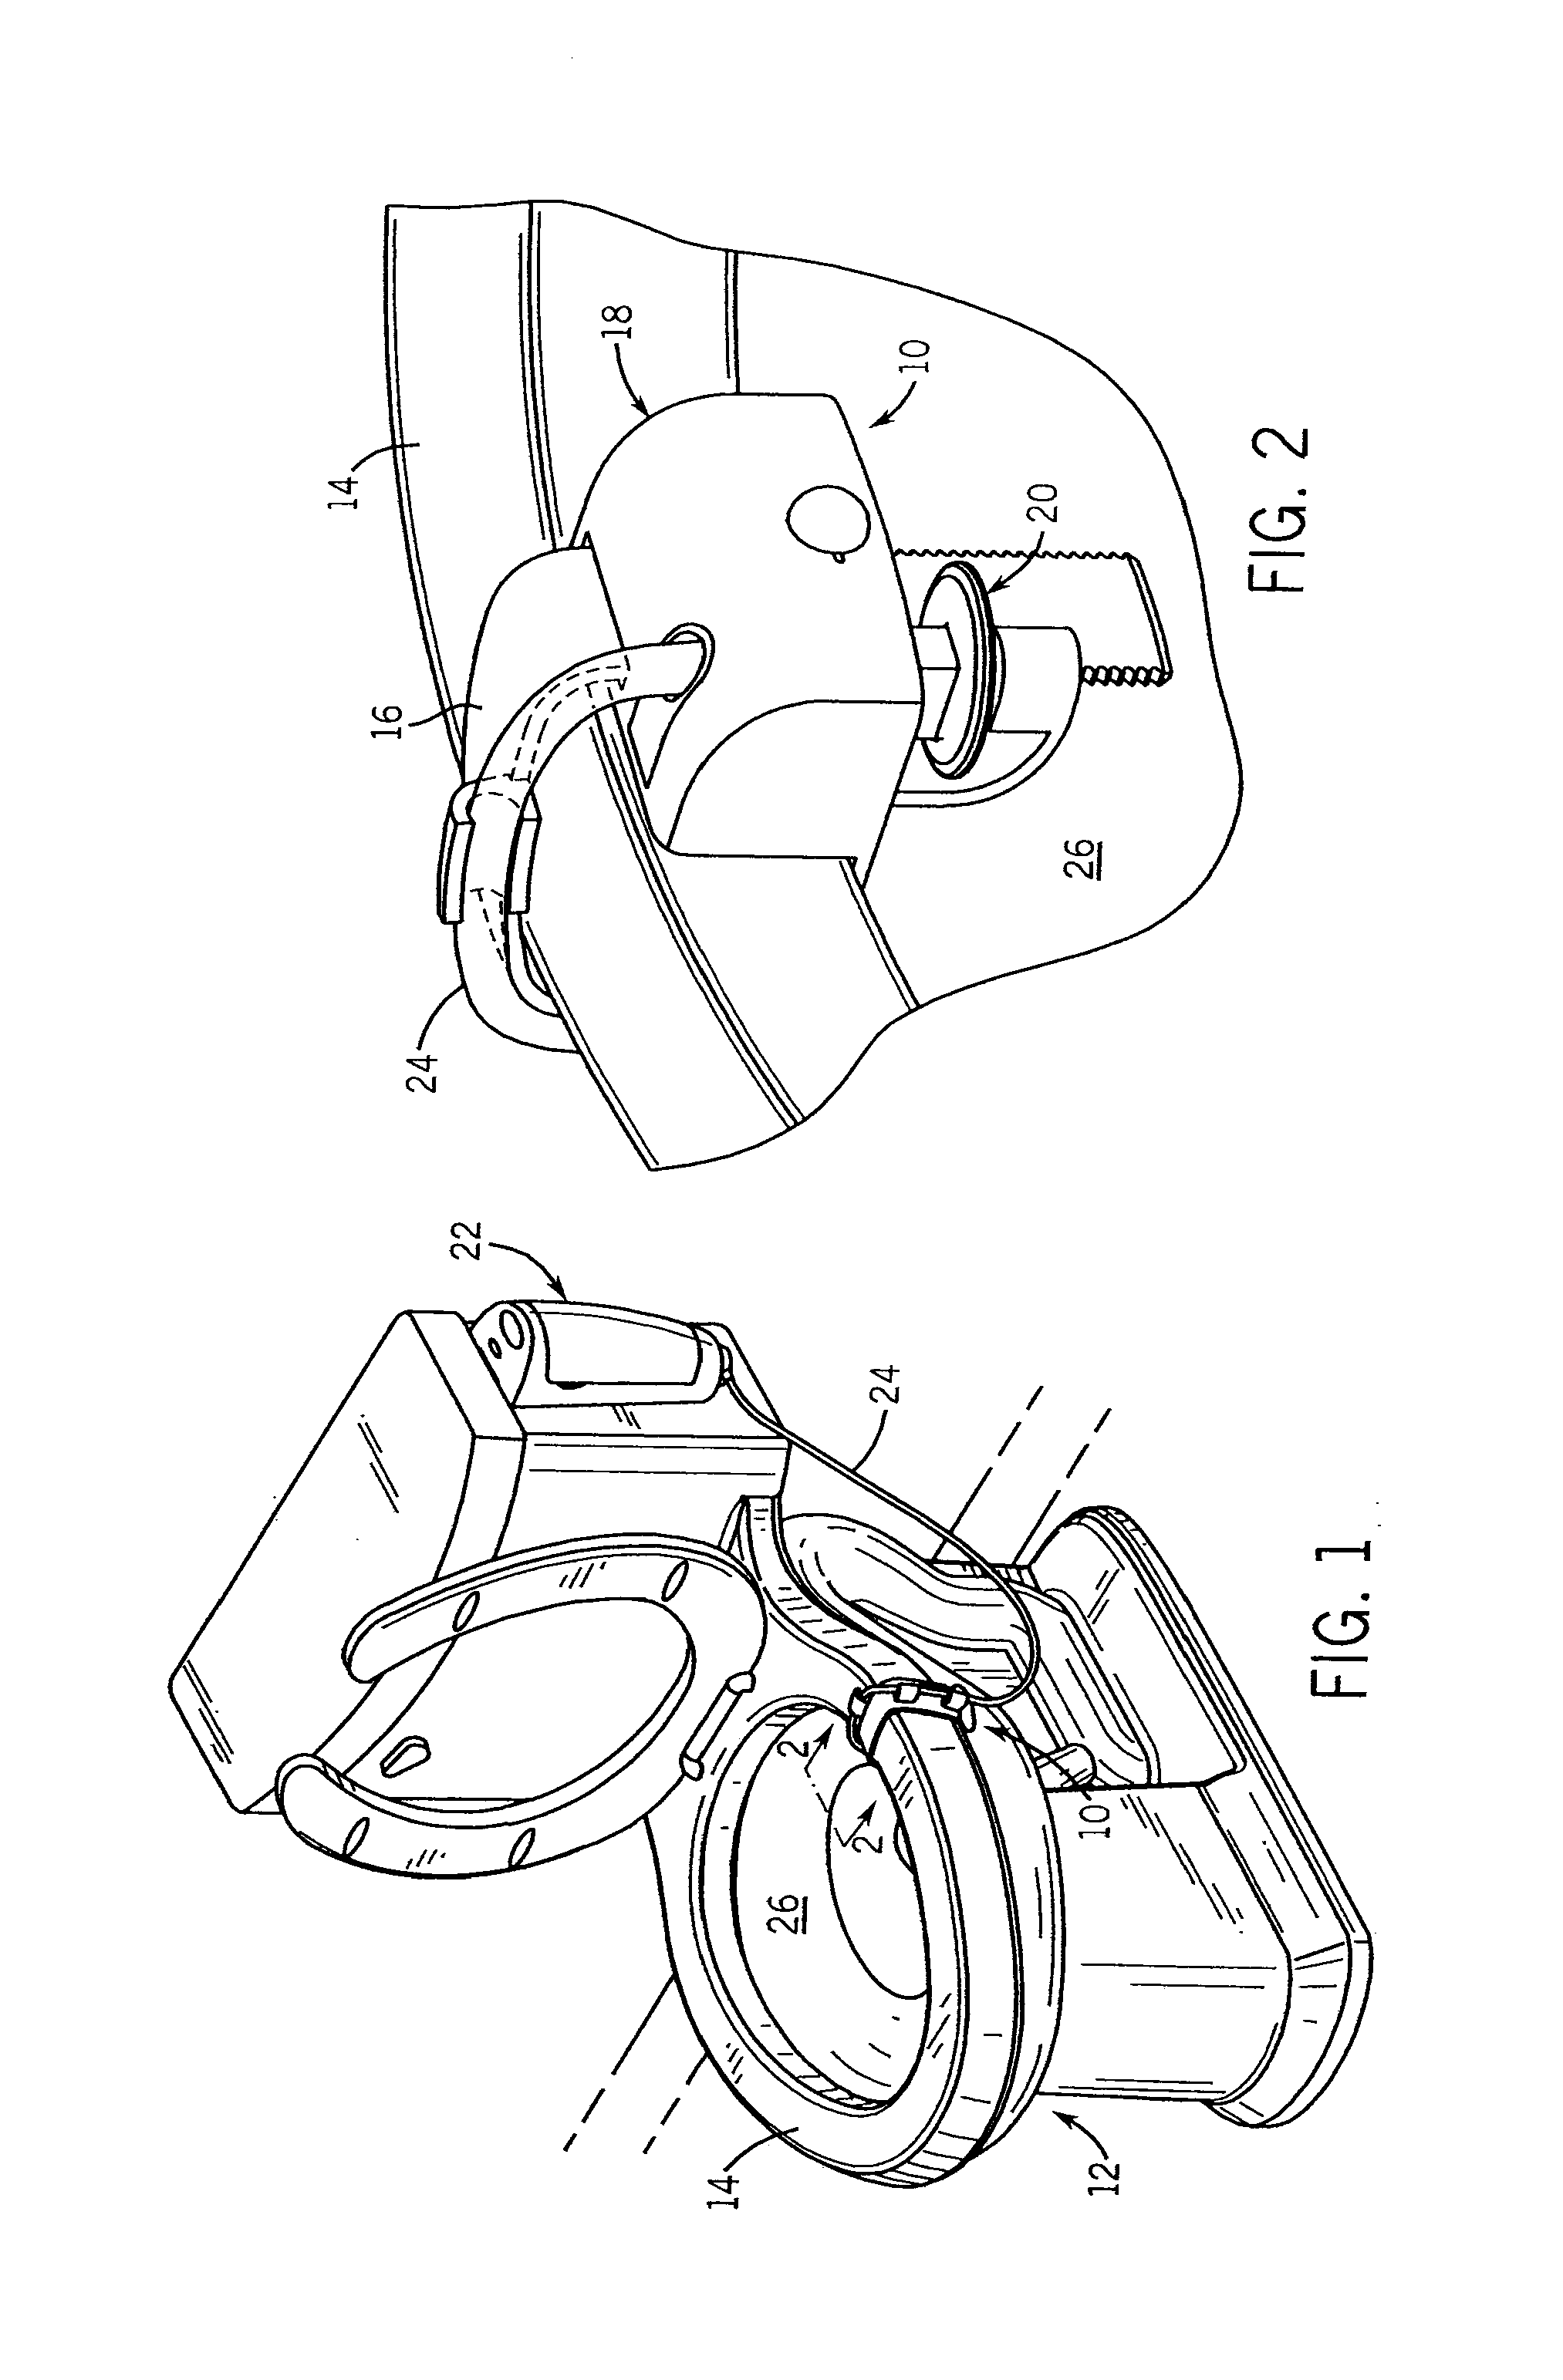 Clip for Mounting a Fluid Delivery Device